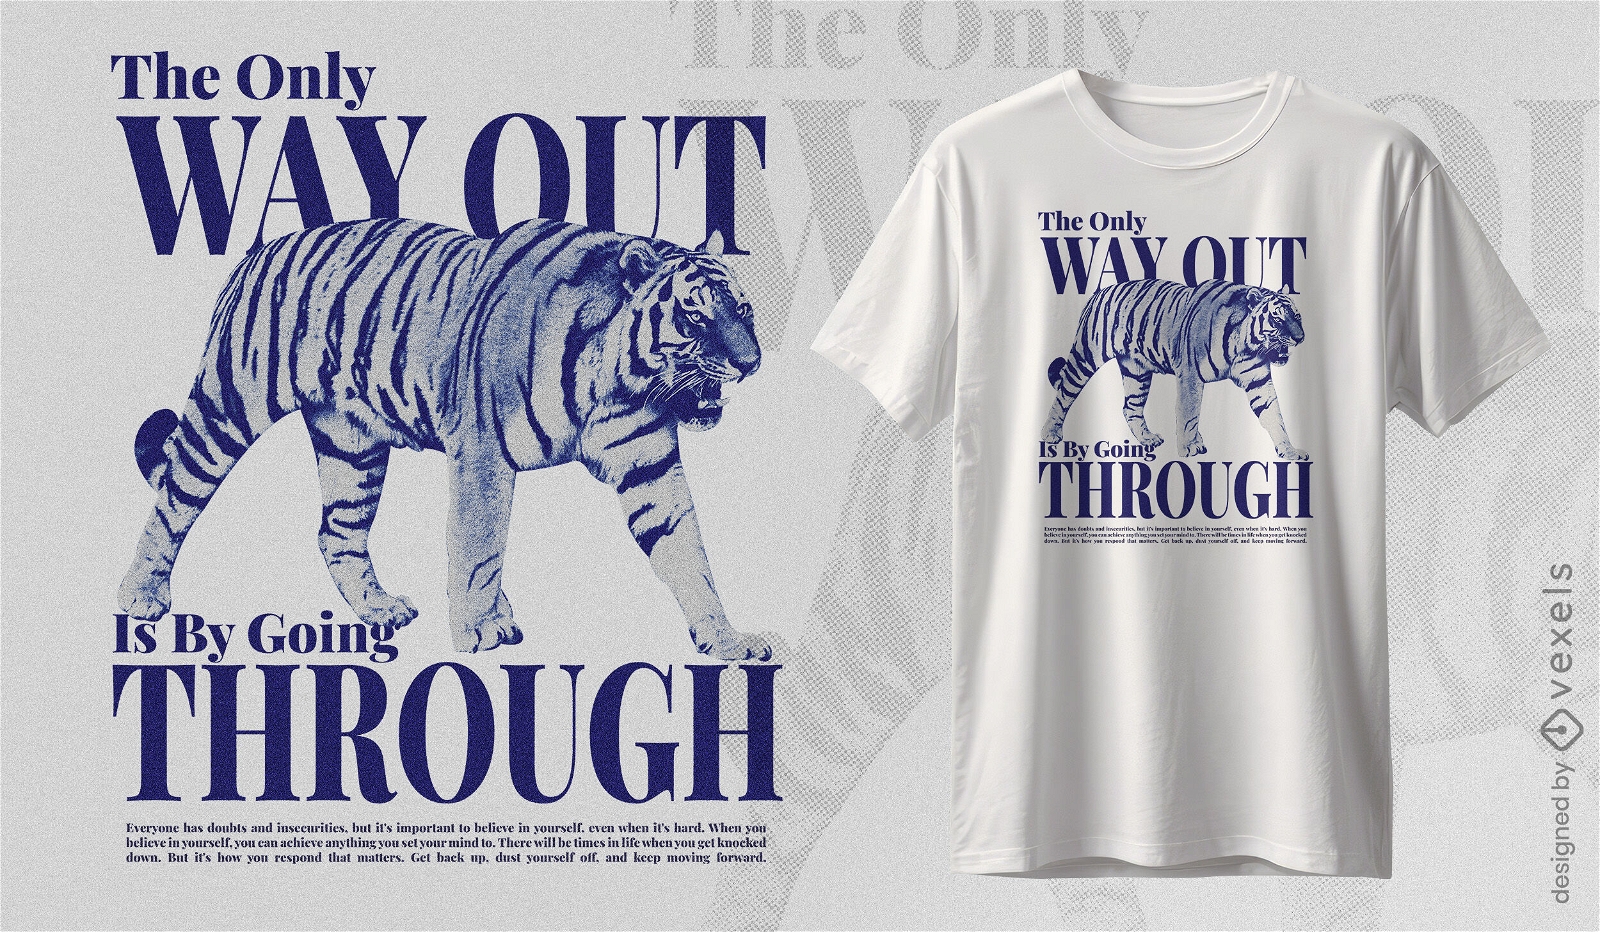 Powerful tiger quote t-shirt design